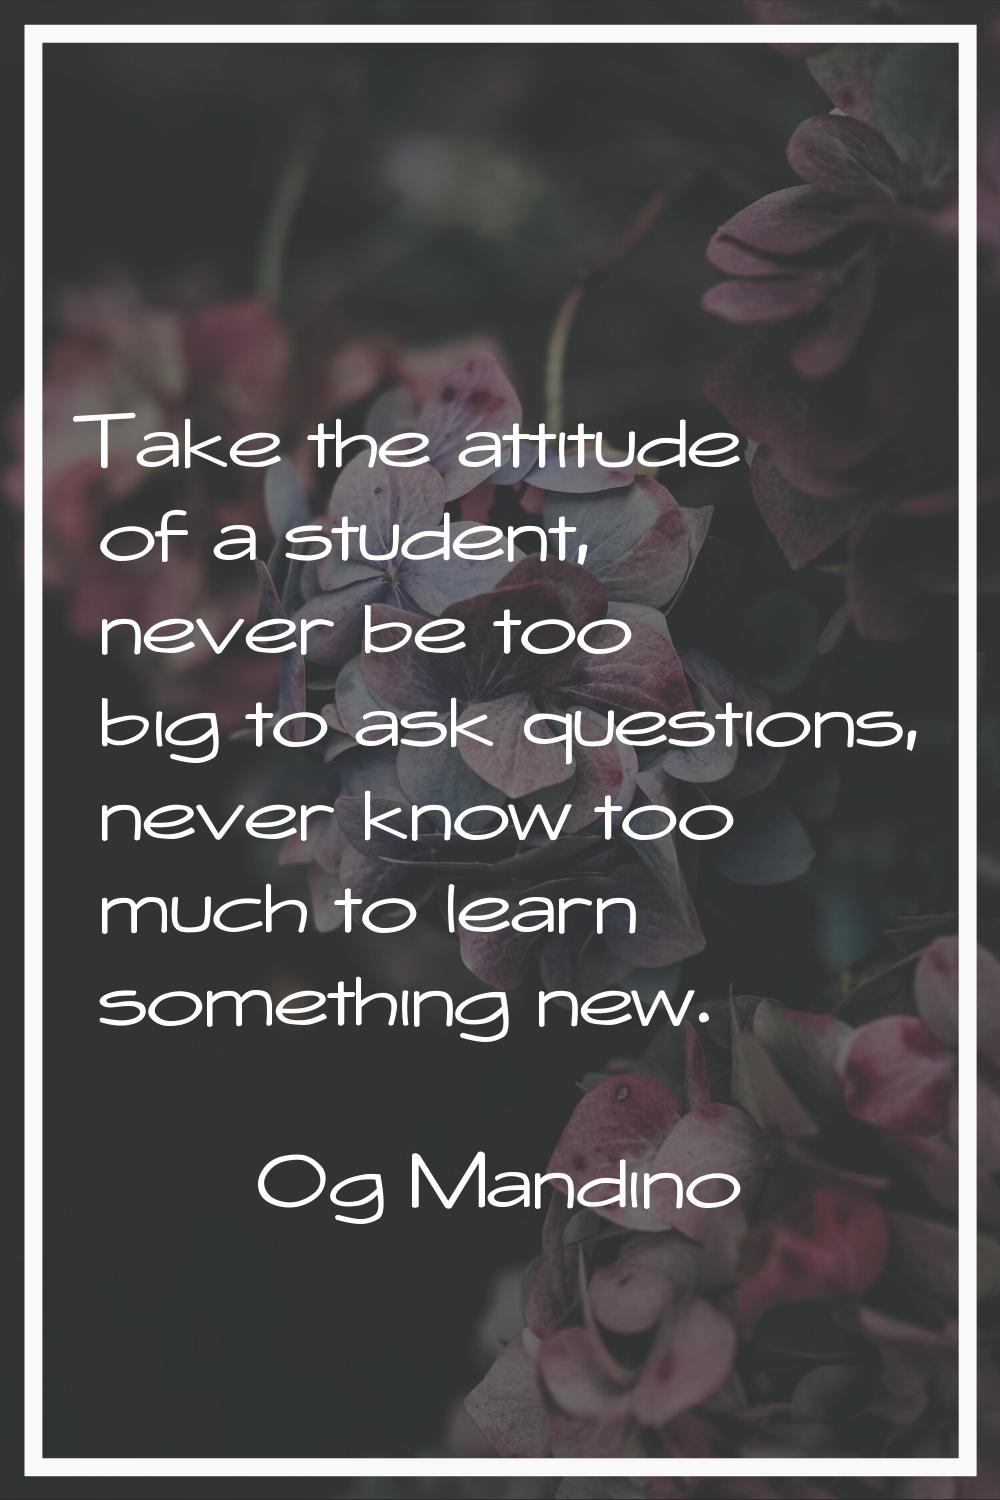 Take the attitude of a student, never be too big to ask questions, never know too much to learn som